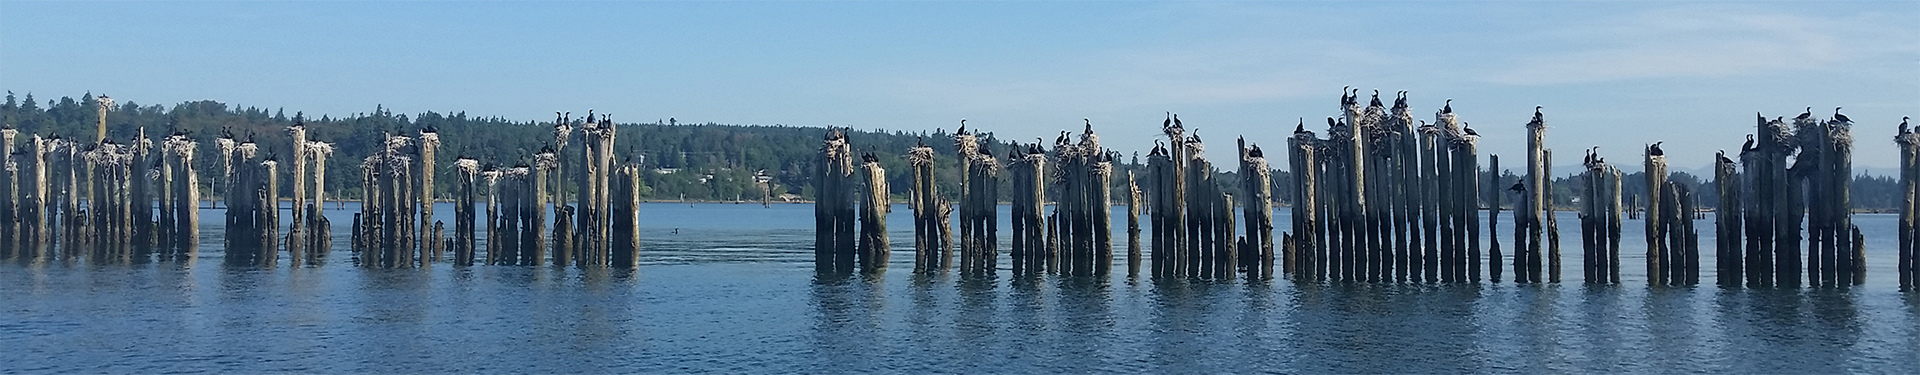 Tulalip Natural Resources image of pillings in Tulalip Bay